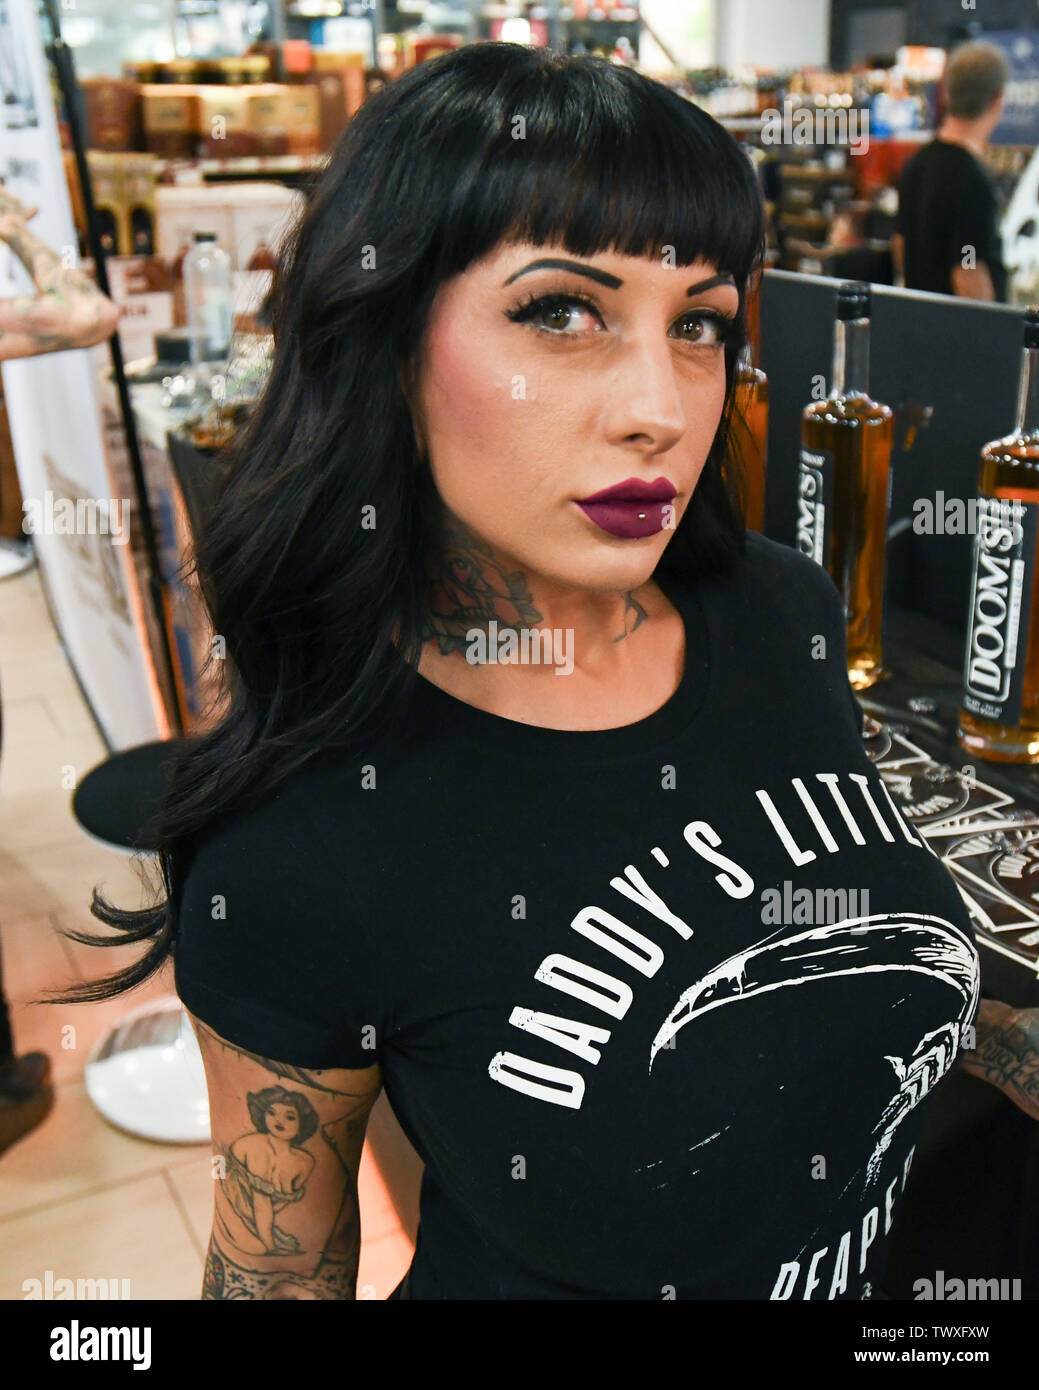 June 22 2019 Glendale California Usa Jessie Lee Attends Dooms Whiskey Tasting At Remedy 